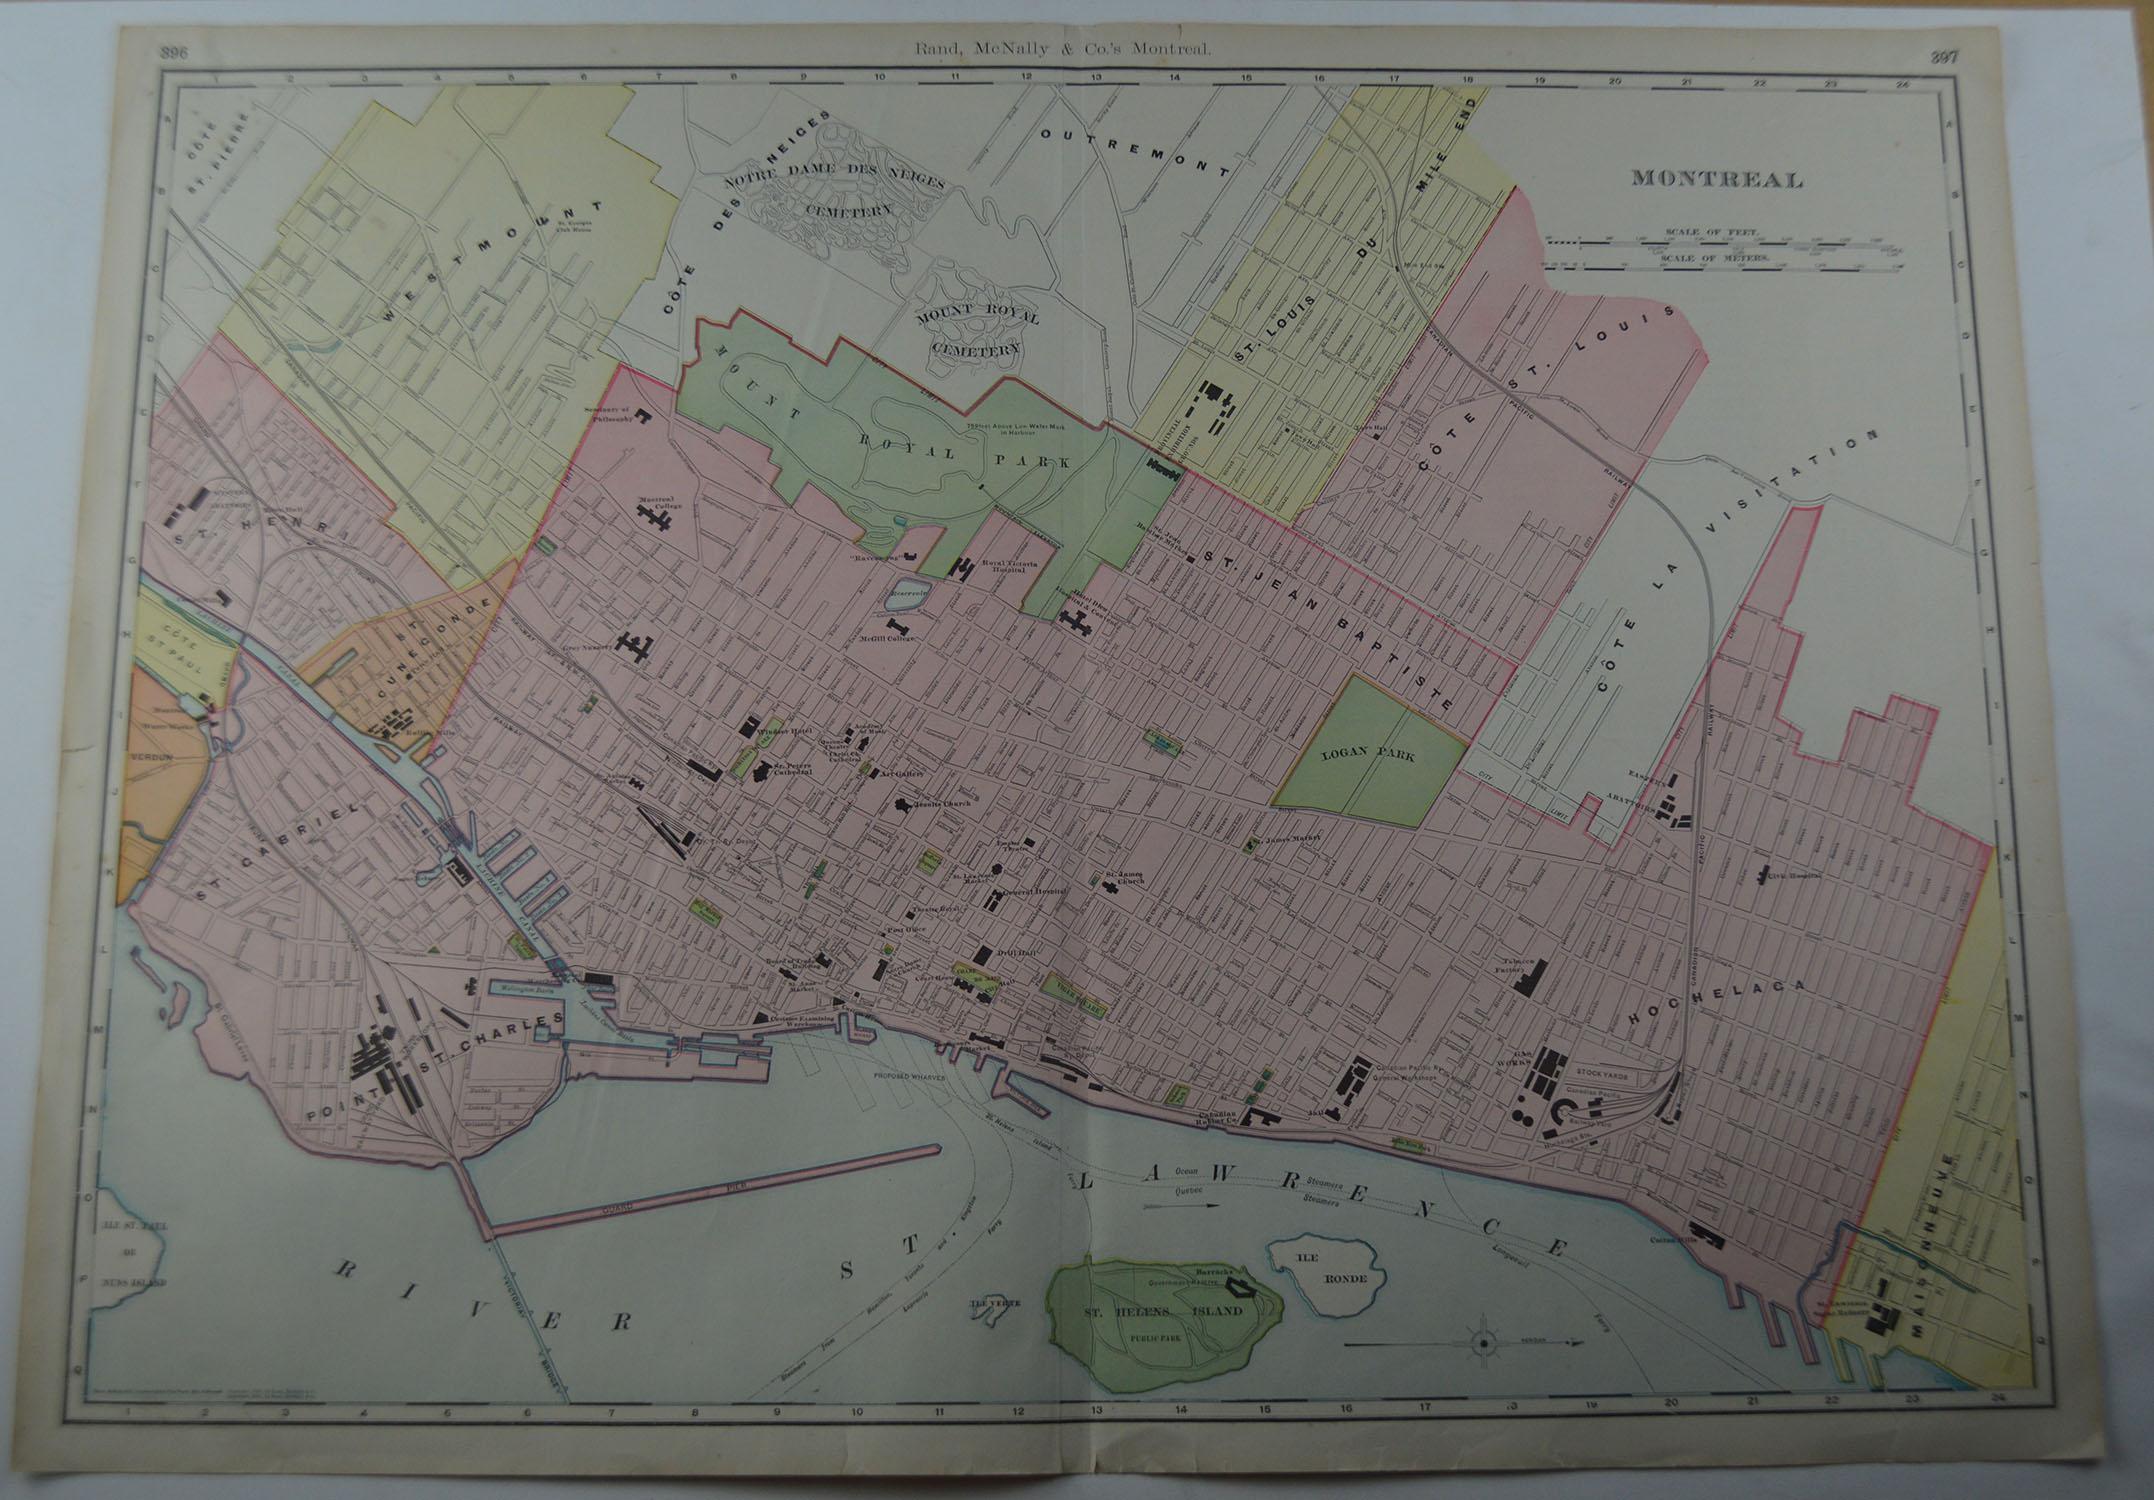 Fabulous colorful map of Montreal

Original color

By Rand, McNally & Co.

Published, circa 1900

Unframed

Free shipping.